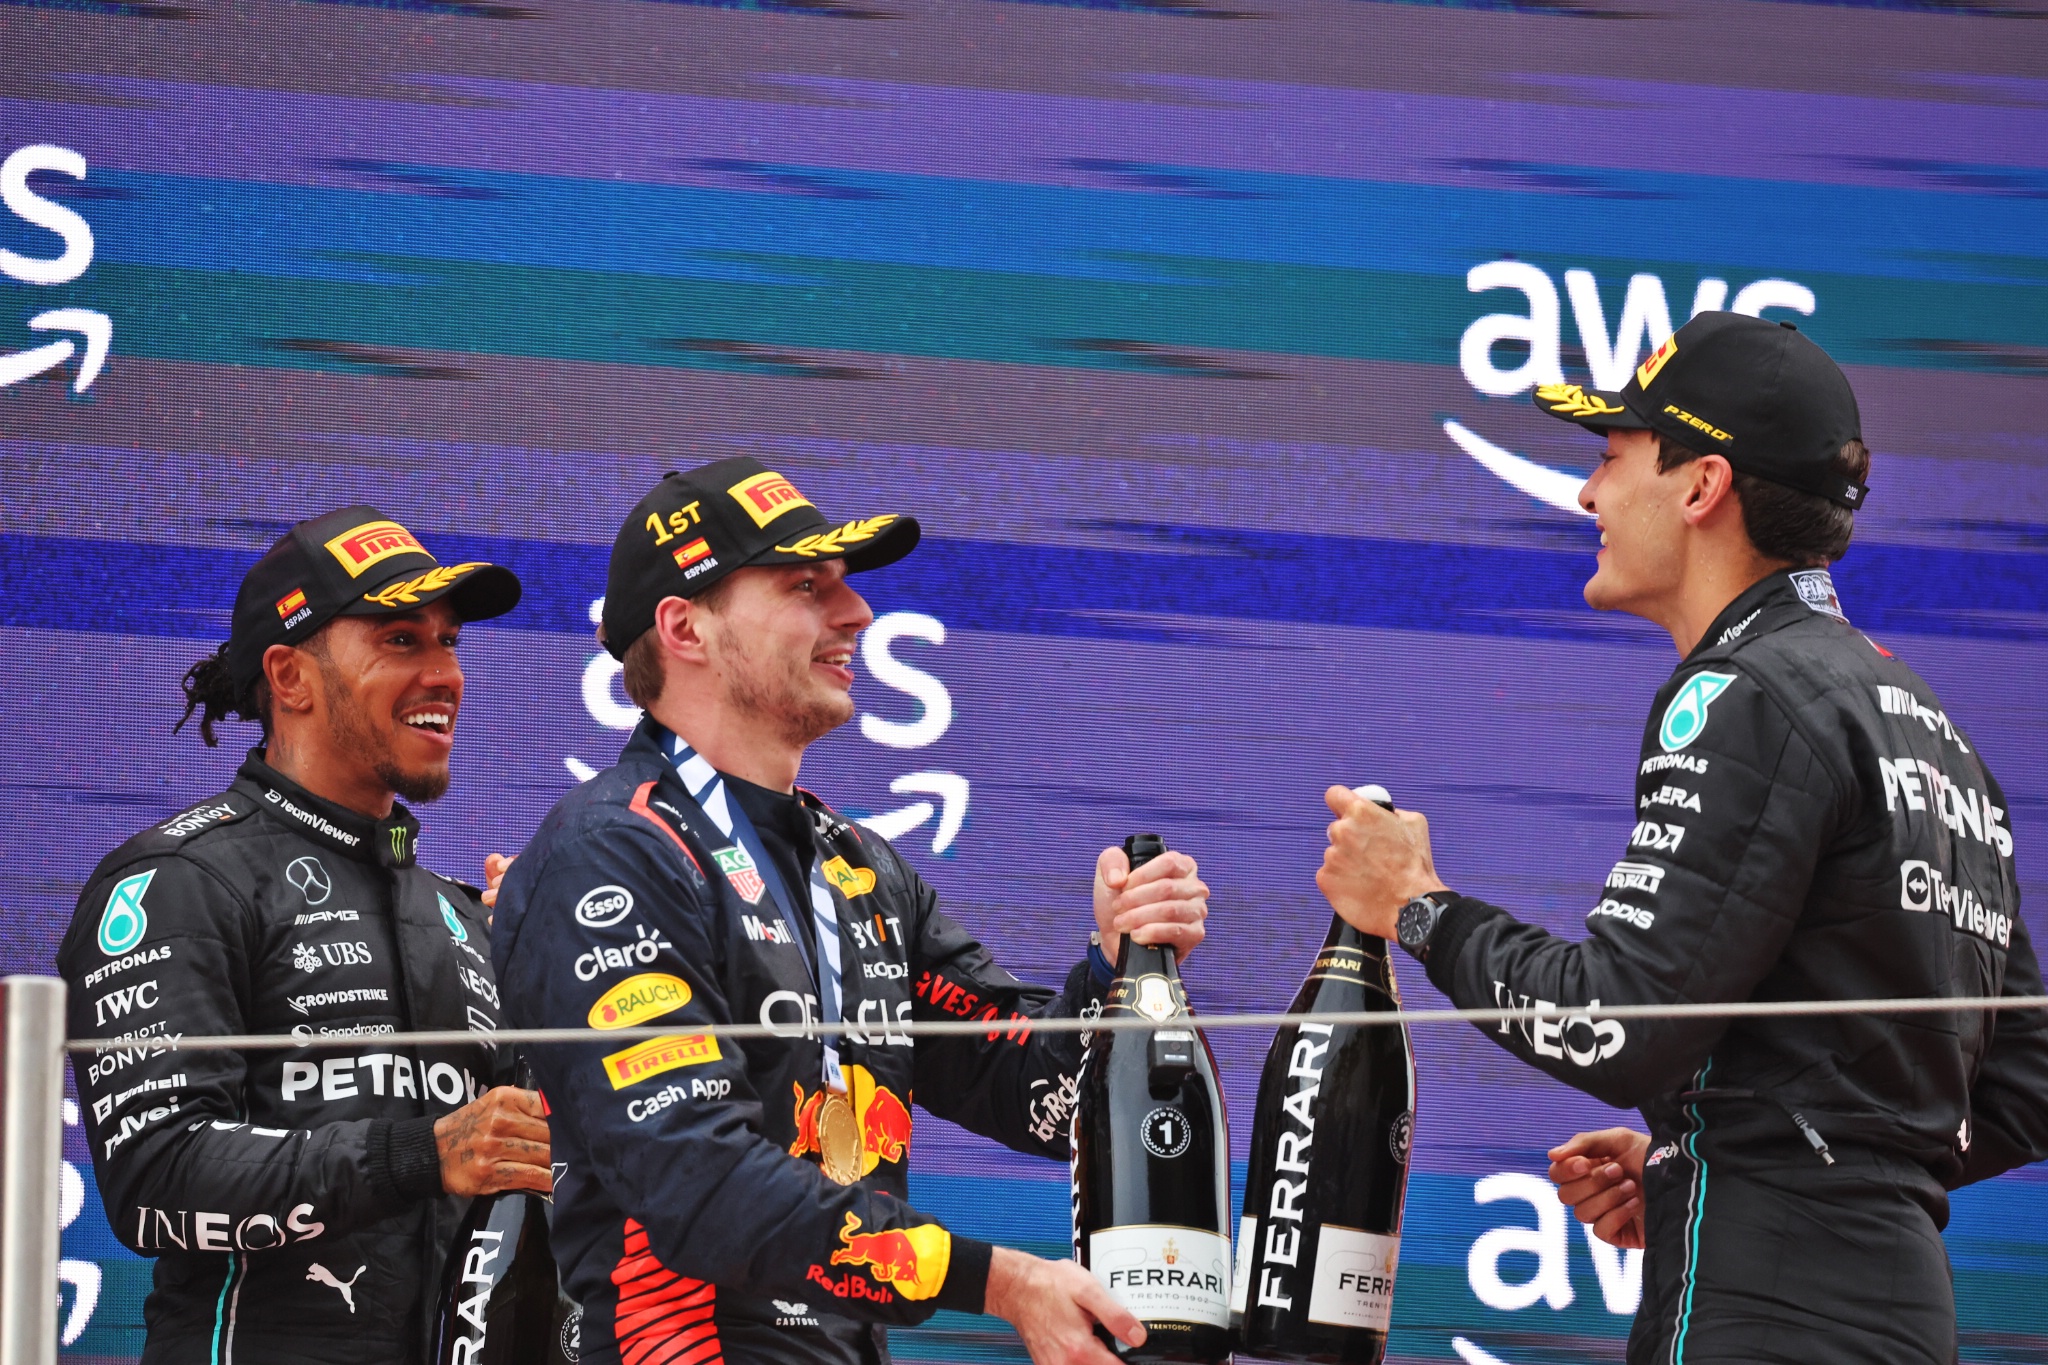 The podium (L to R): Lewis Hamilton (GBR) Mercedes AMG F1, second; Max Verstappen (NLD) Red Bull Racing, race winner; George